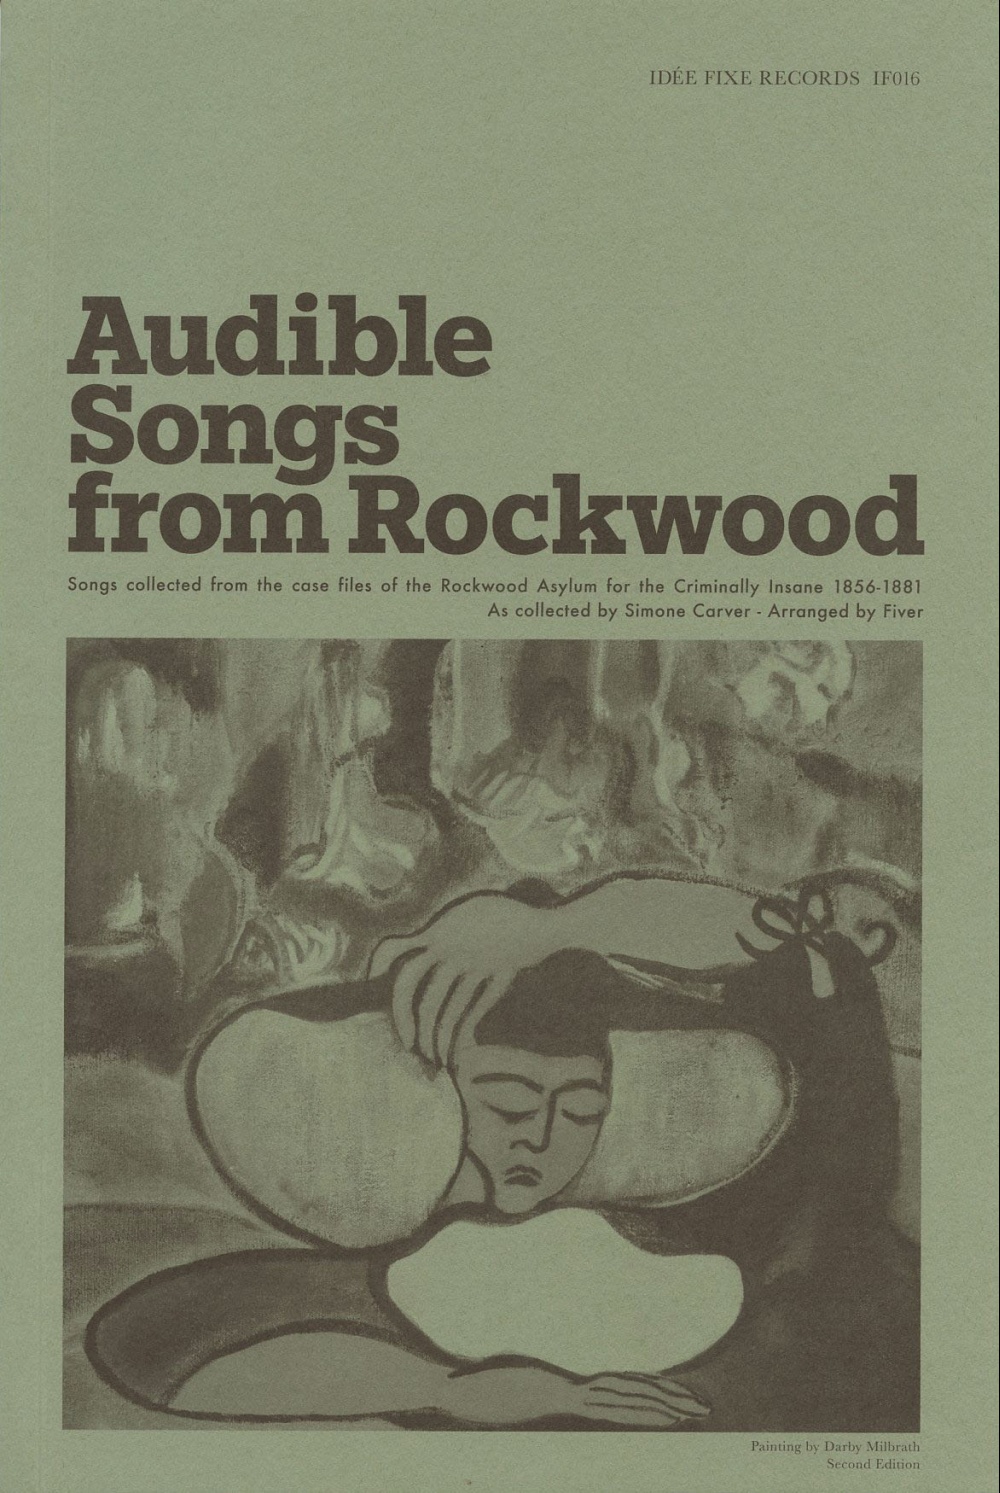 audible songs from rockwood